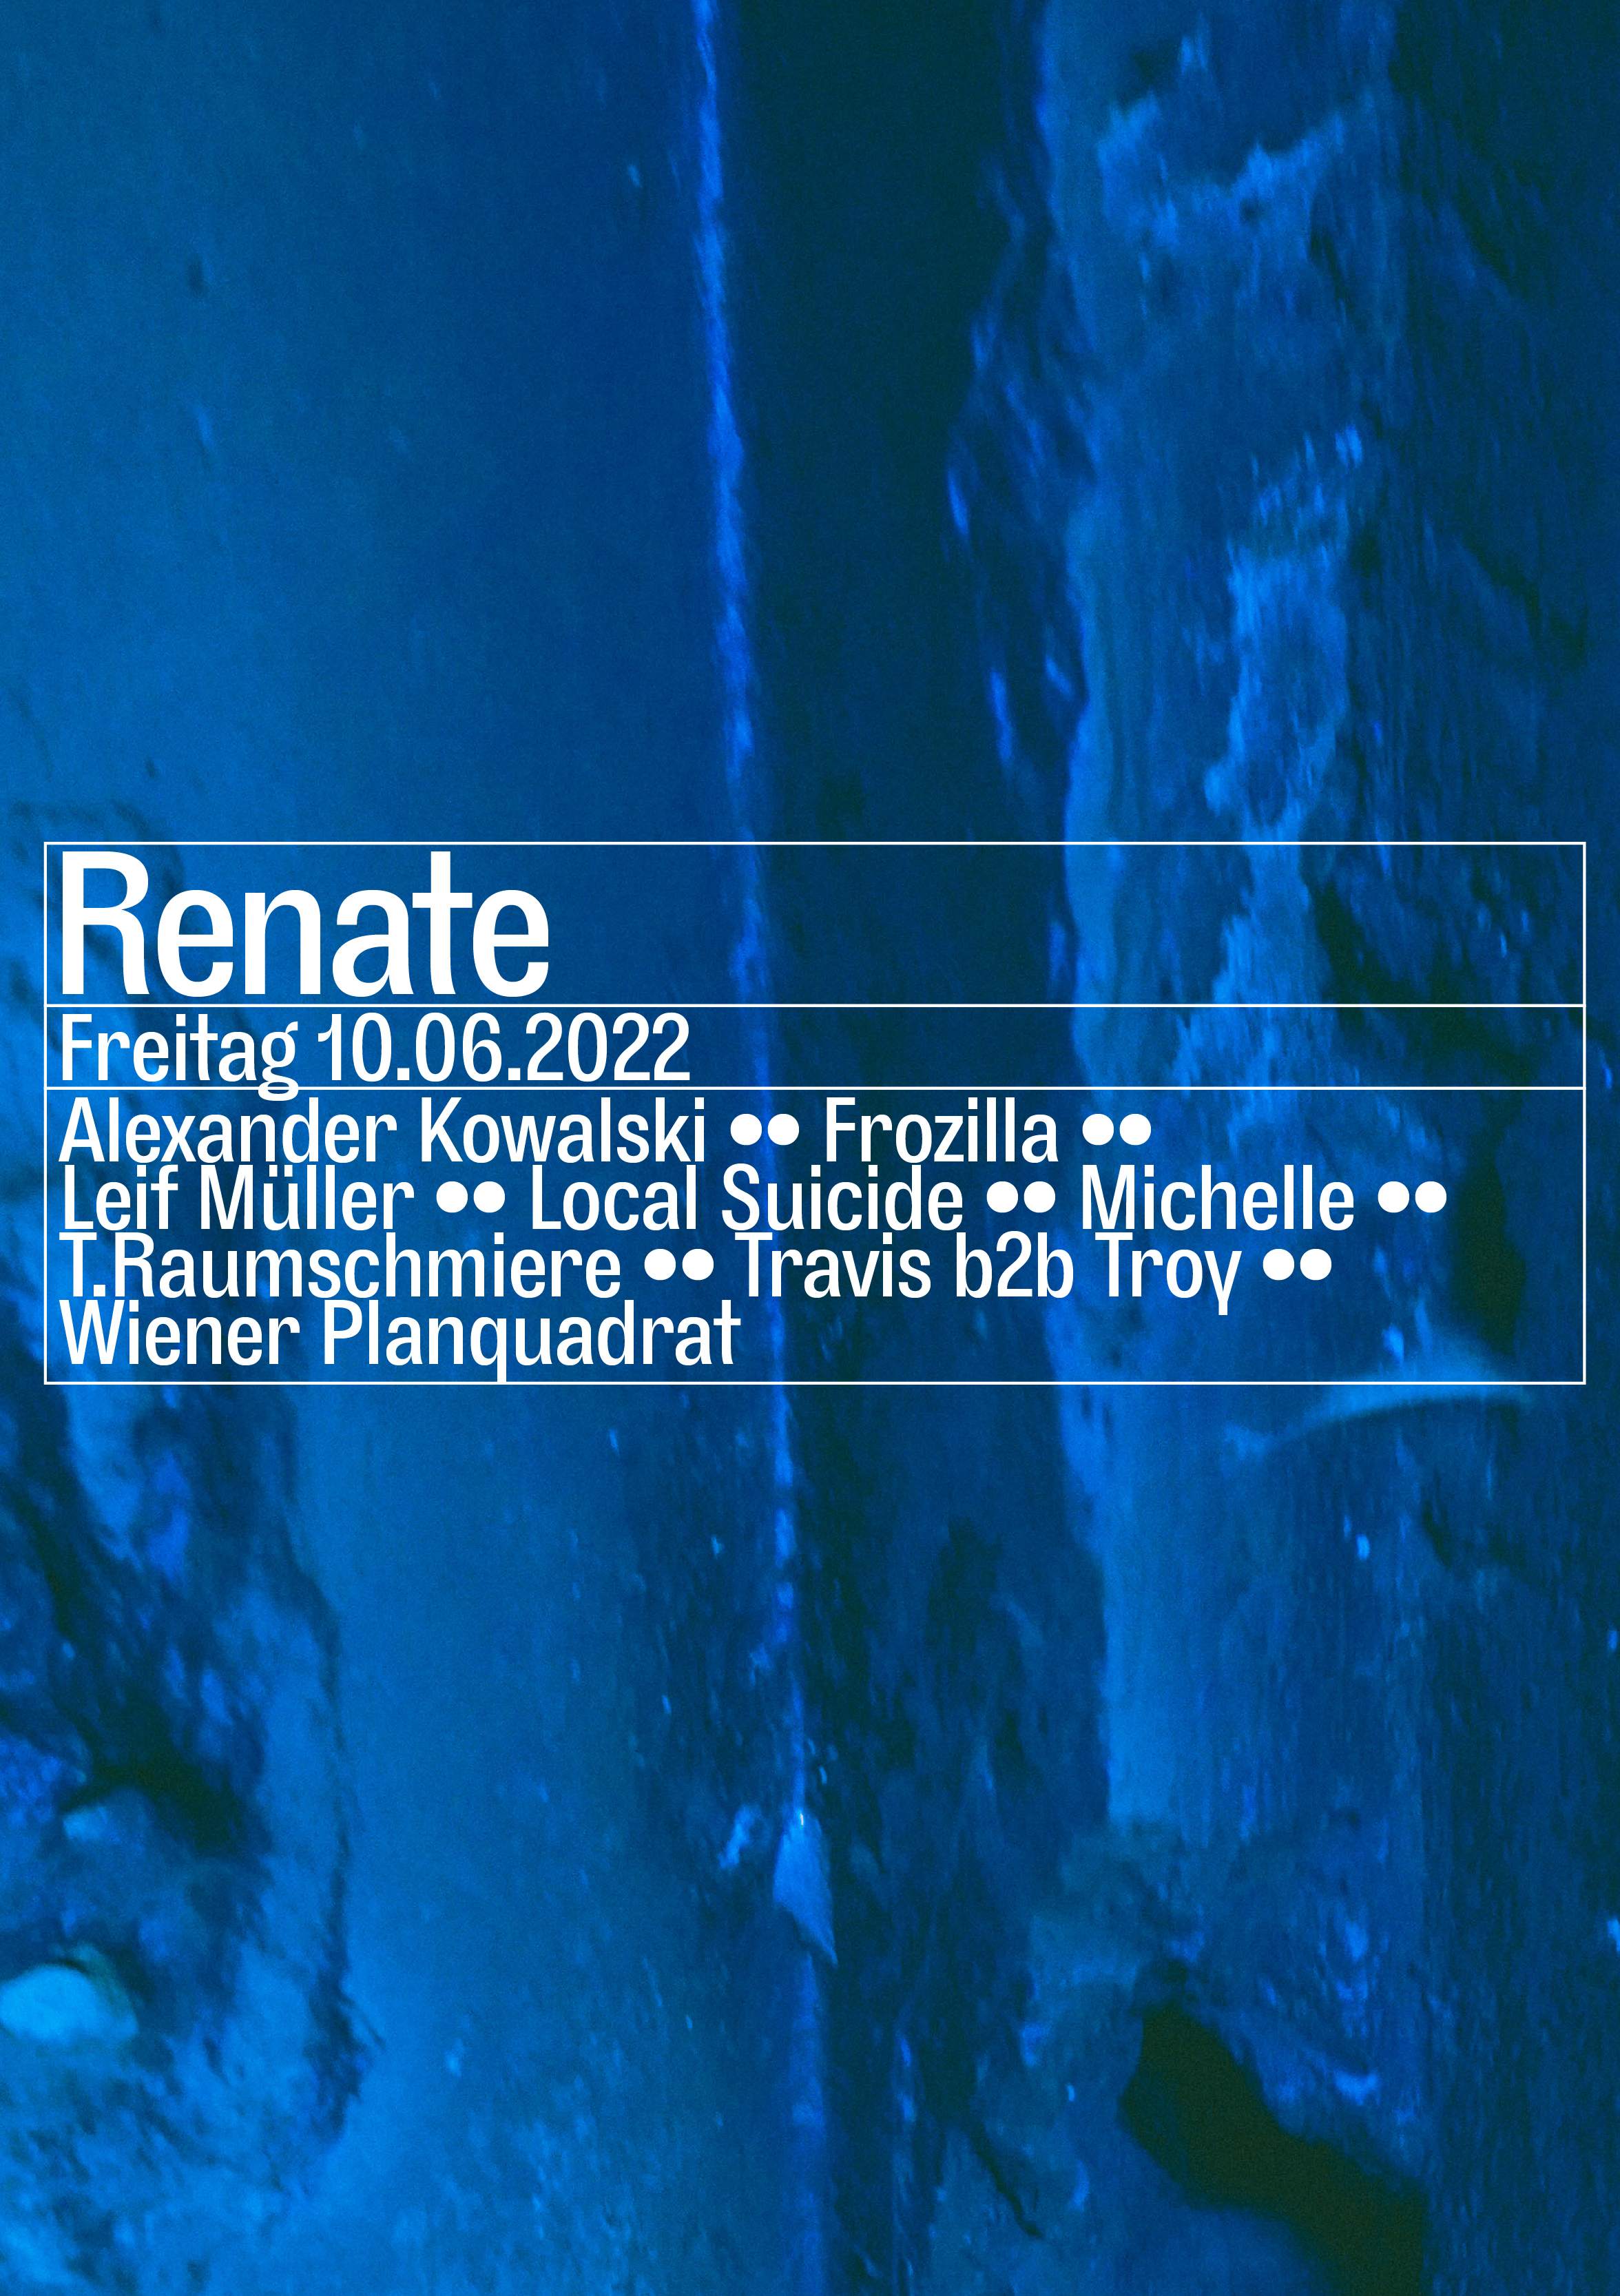 Freitag with Alexander Kowalski, Leif Müller, Local Suicide, Michelle - フライヤー表